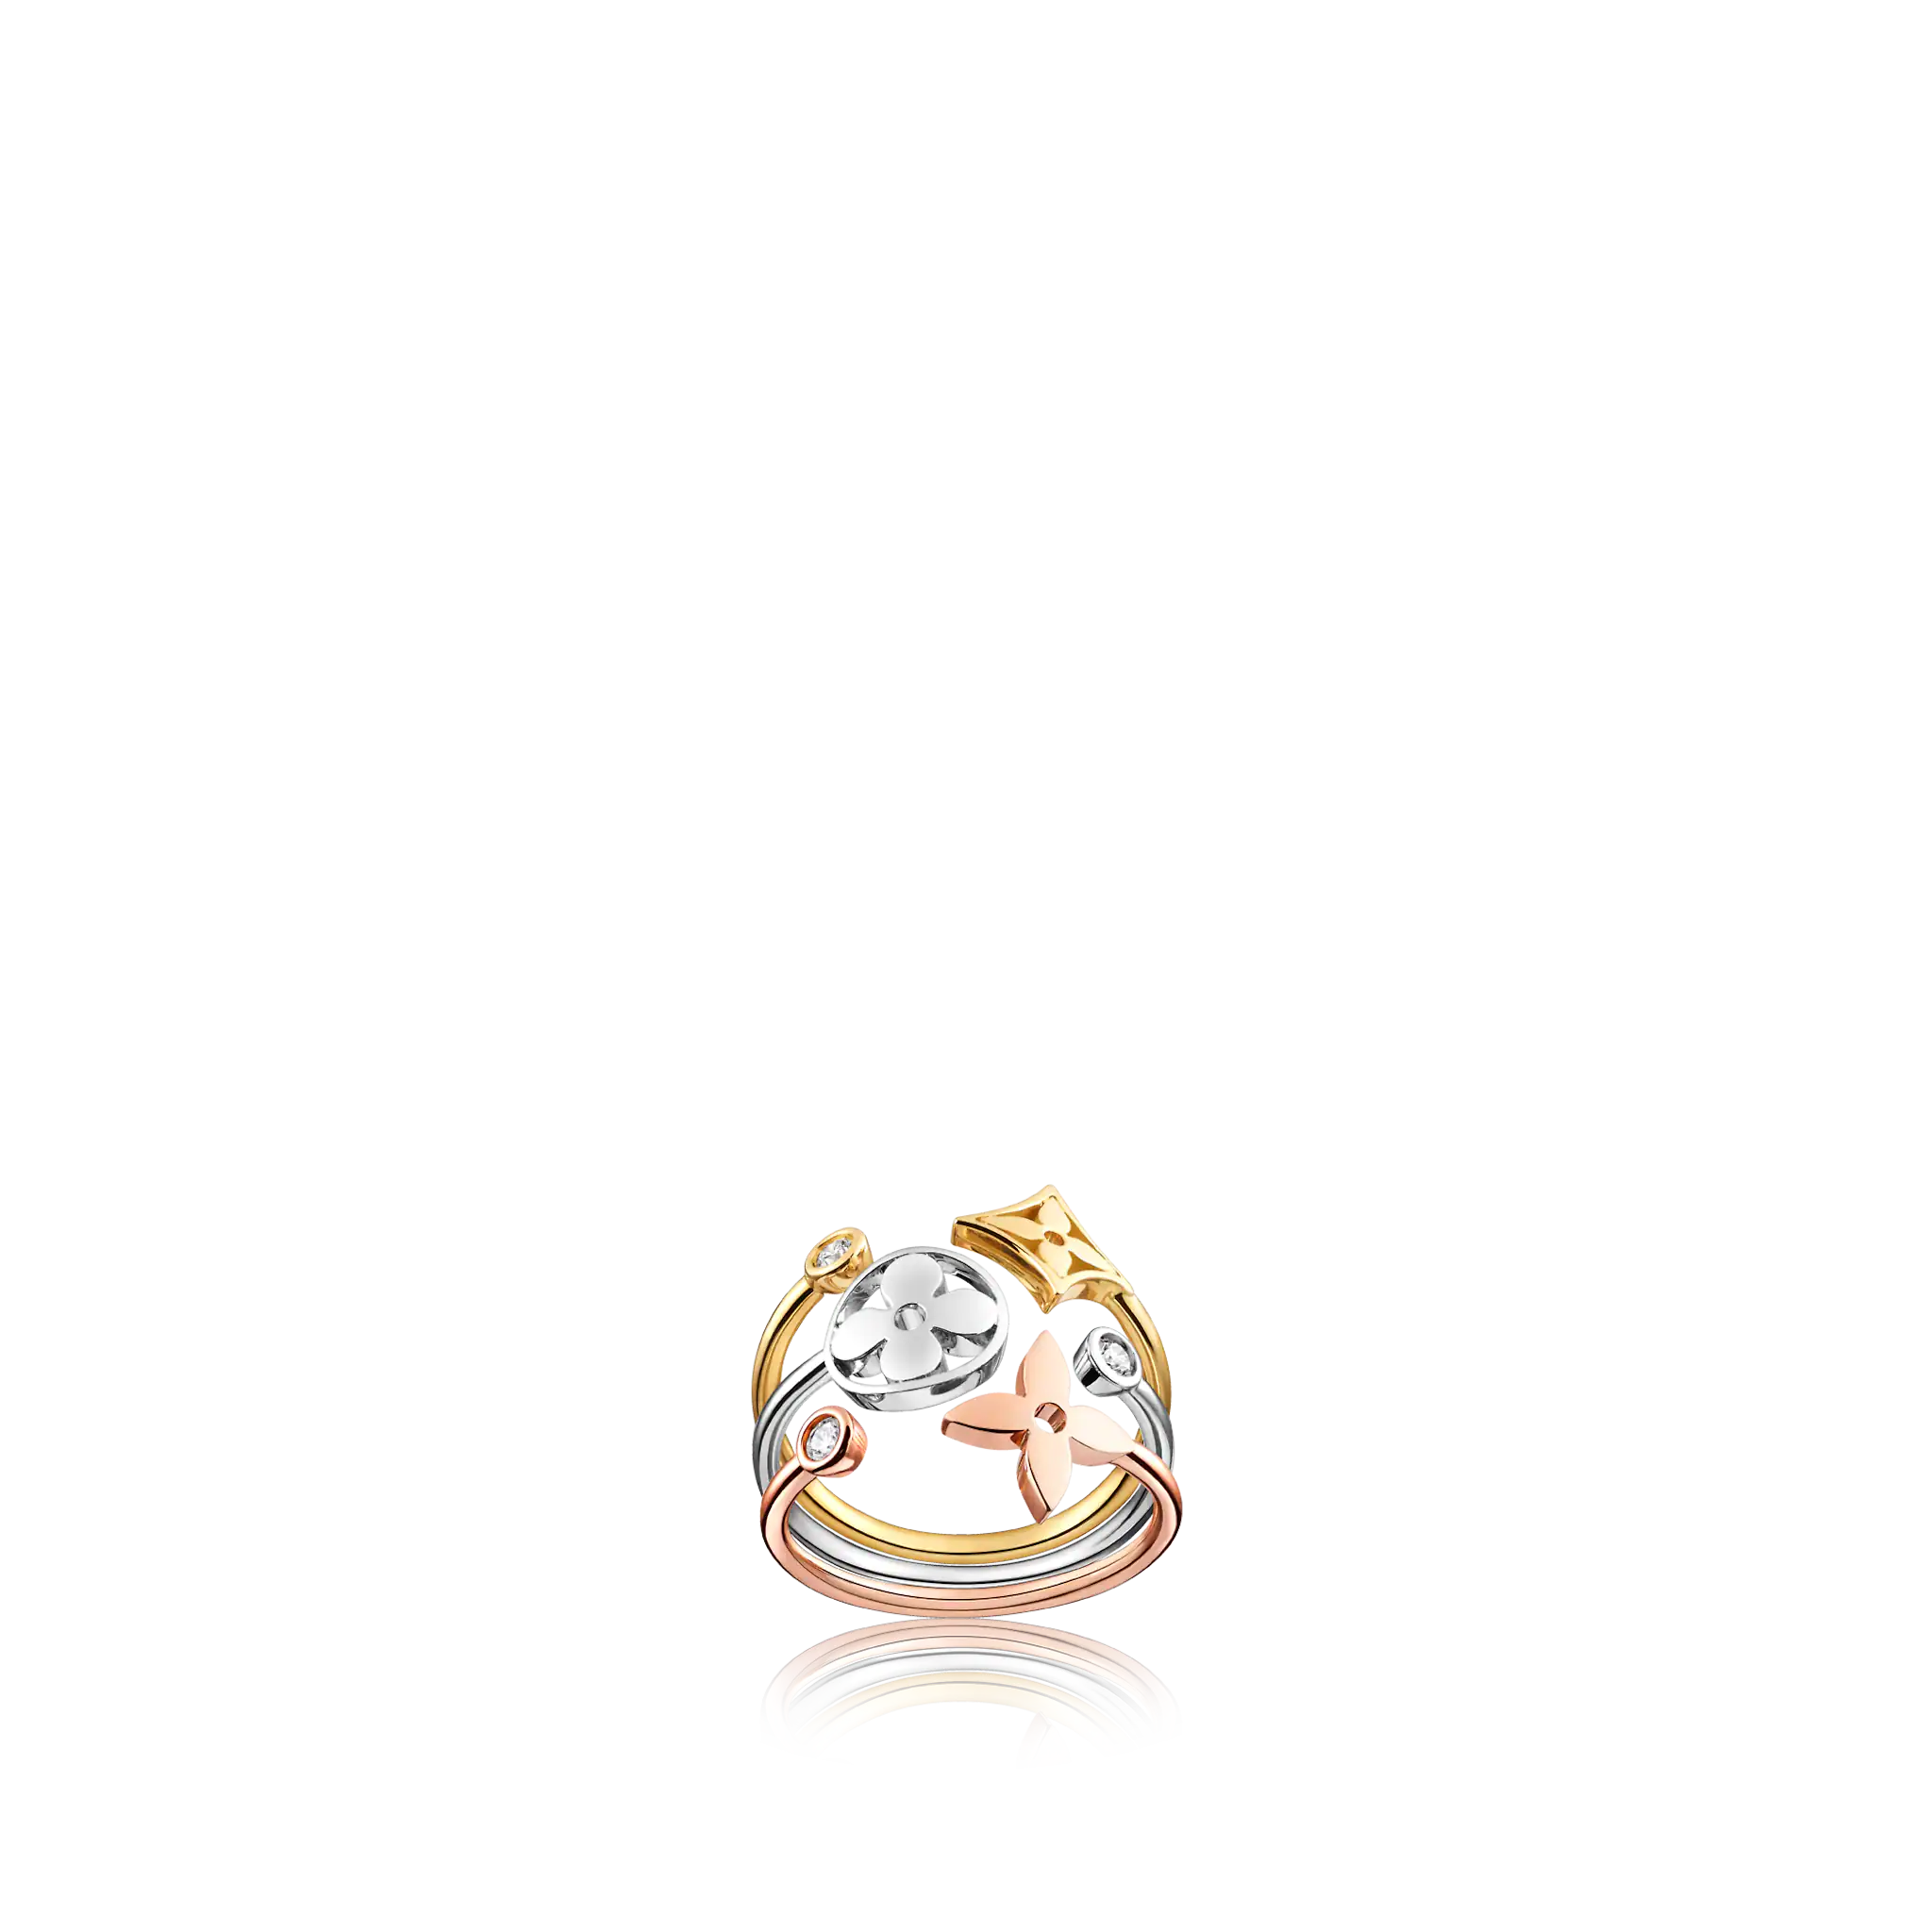 Louis Vuitton Idylle Blossom Two-Row Ring, Pink Gold and Diamonds. Size 52